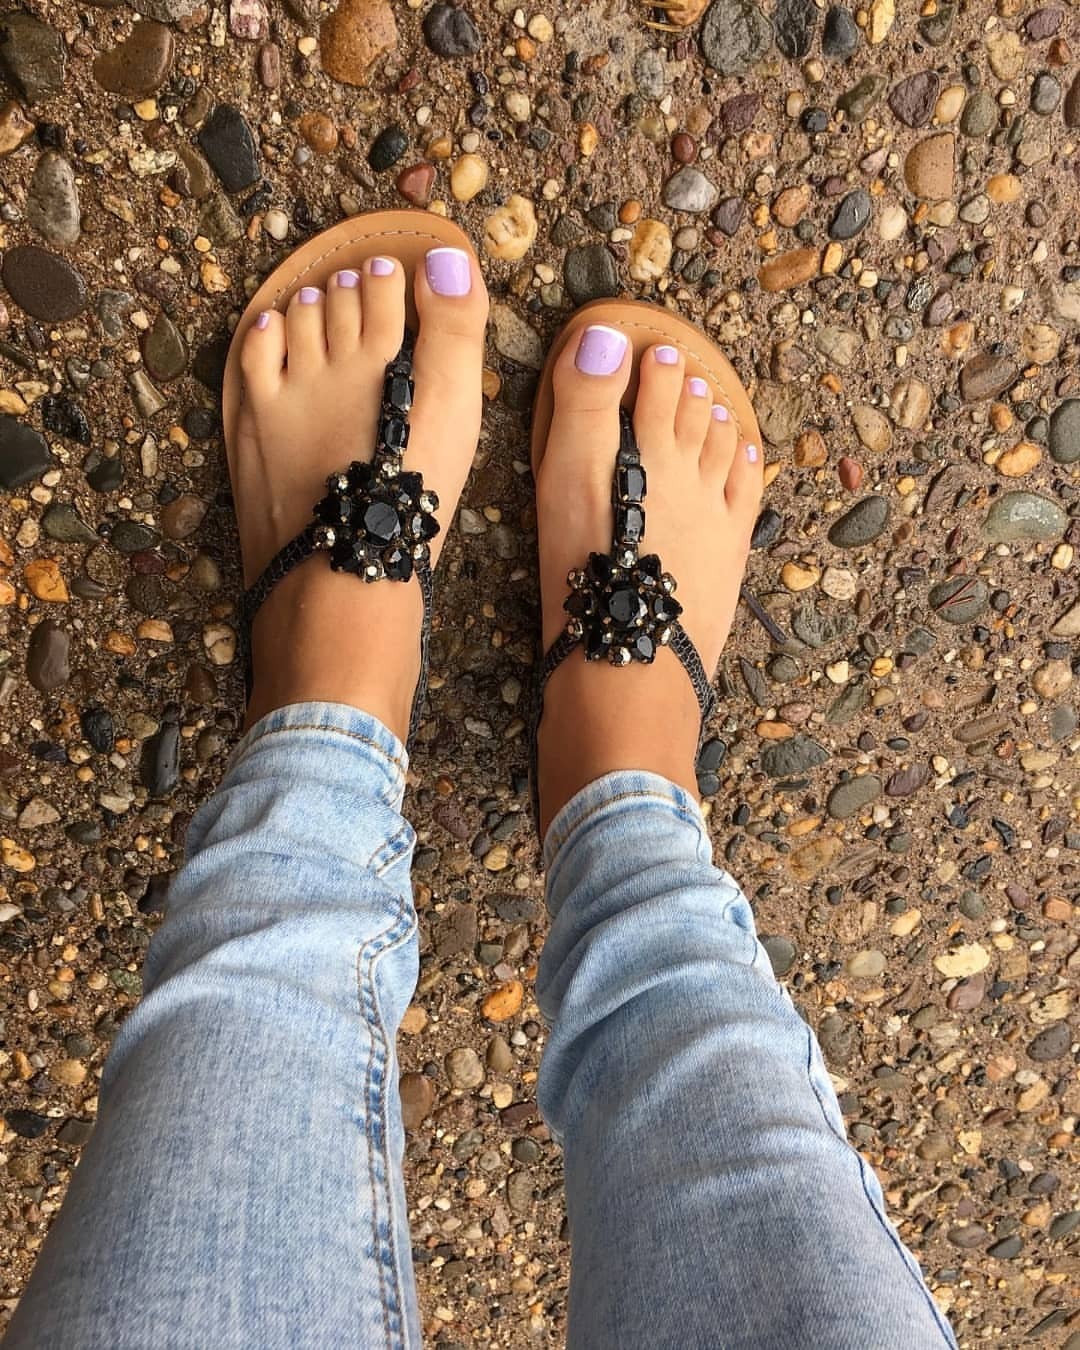 Awesome Pedicure Prettyfeet Feet Toes